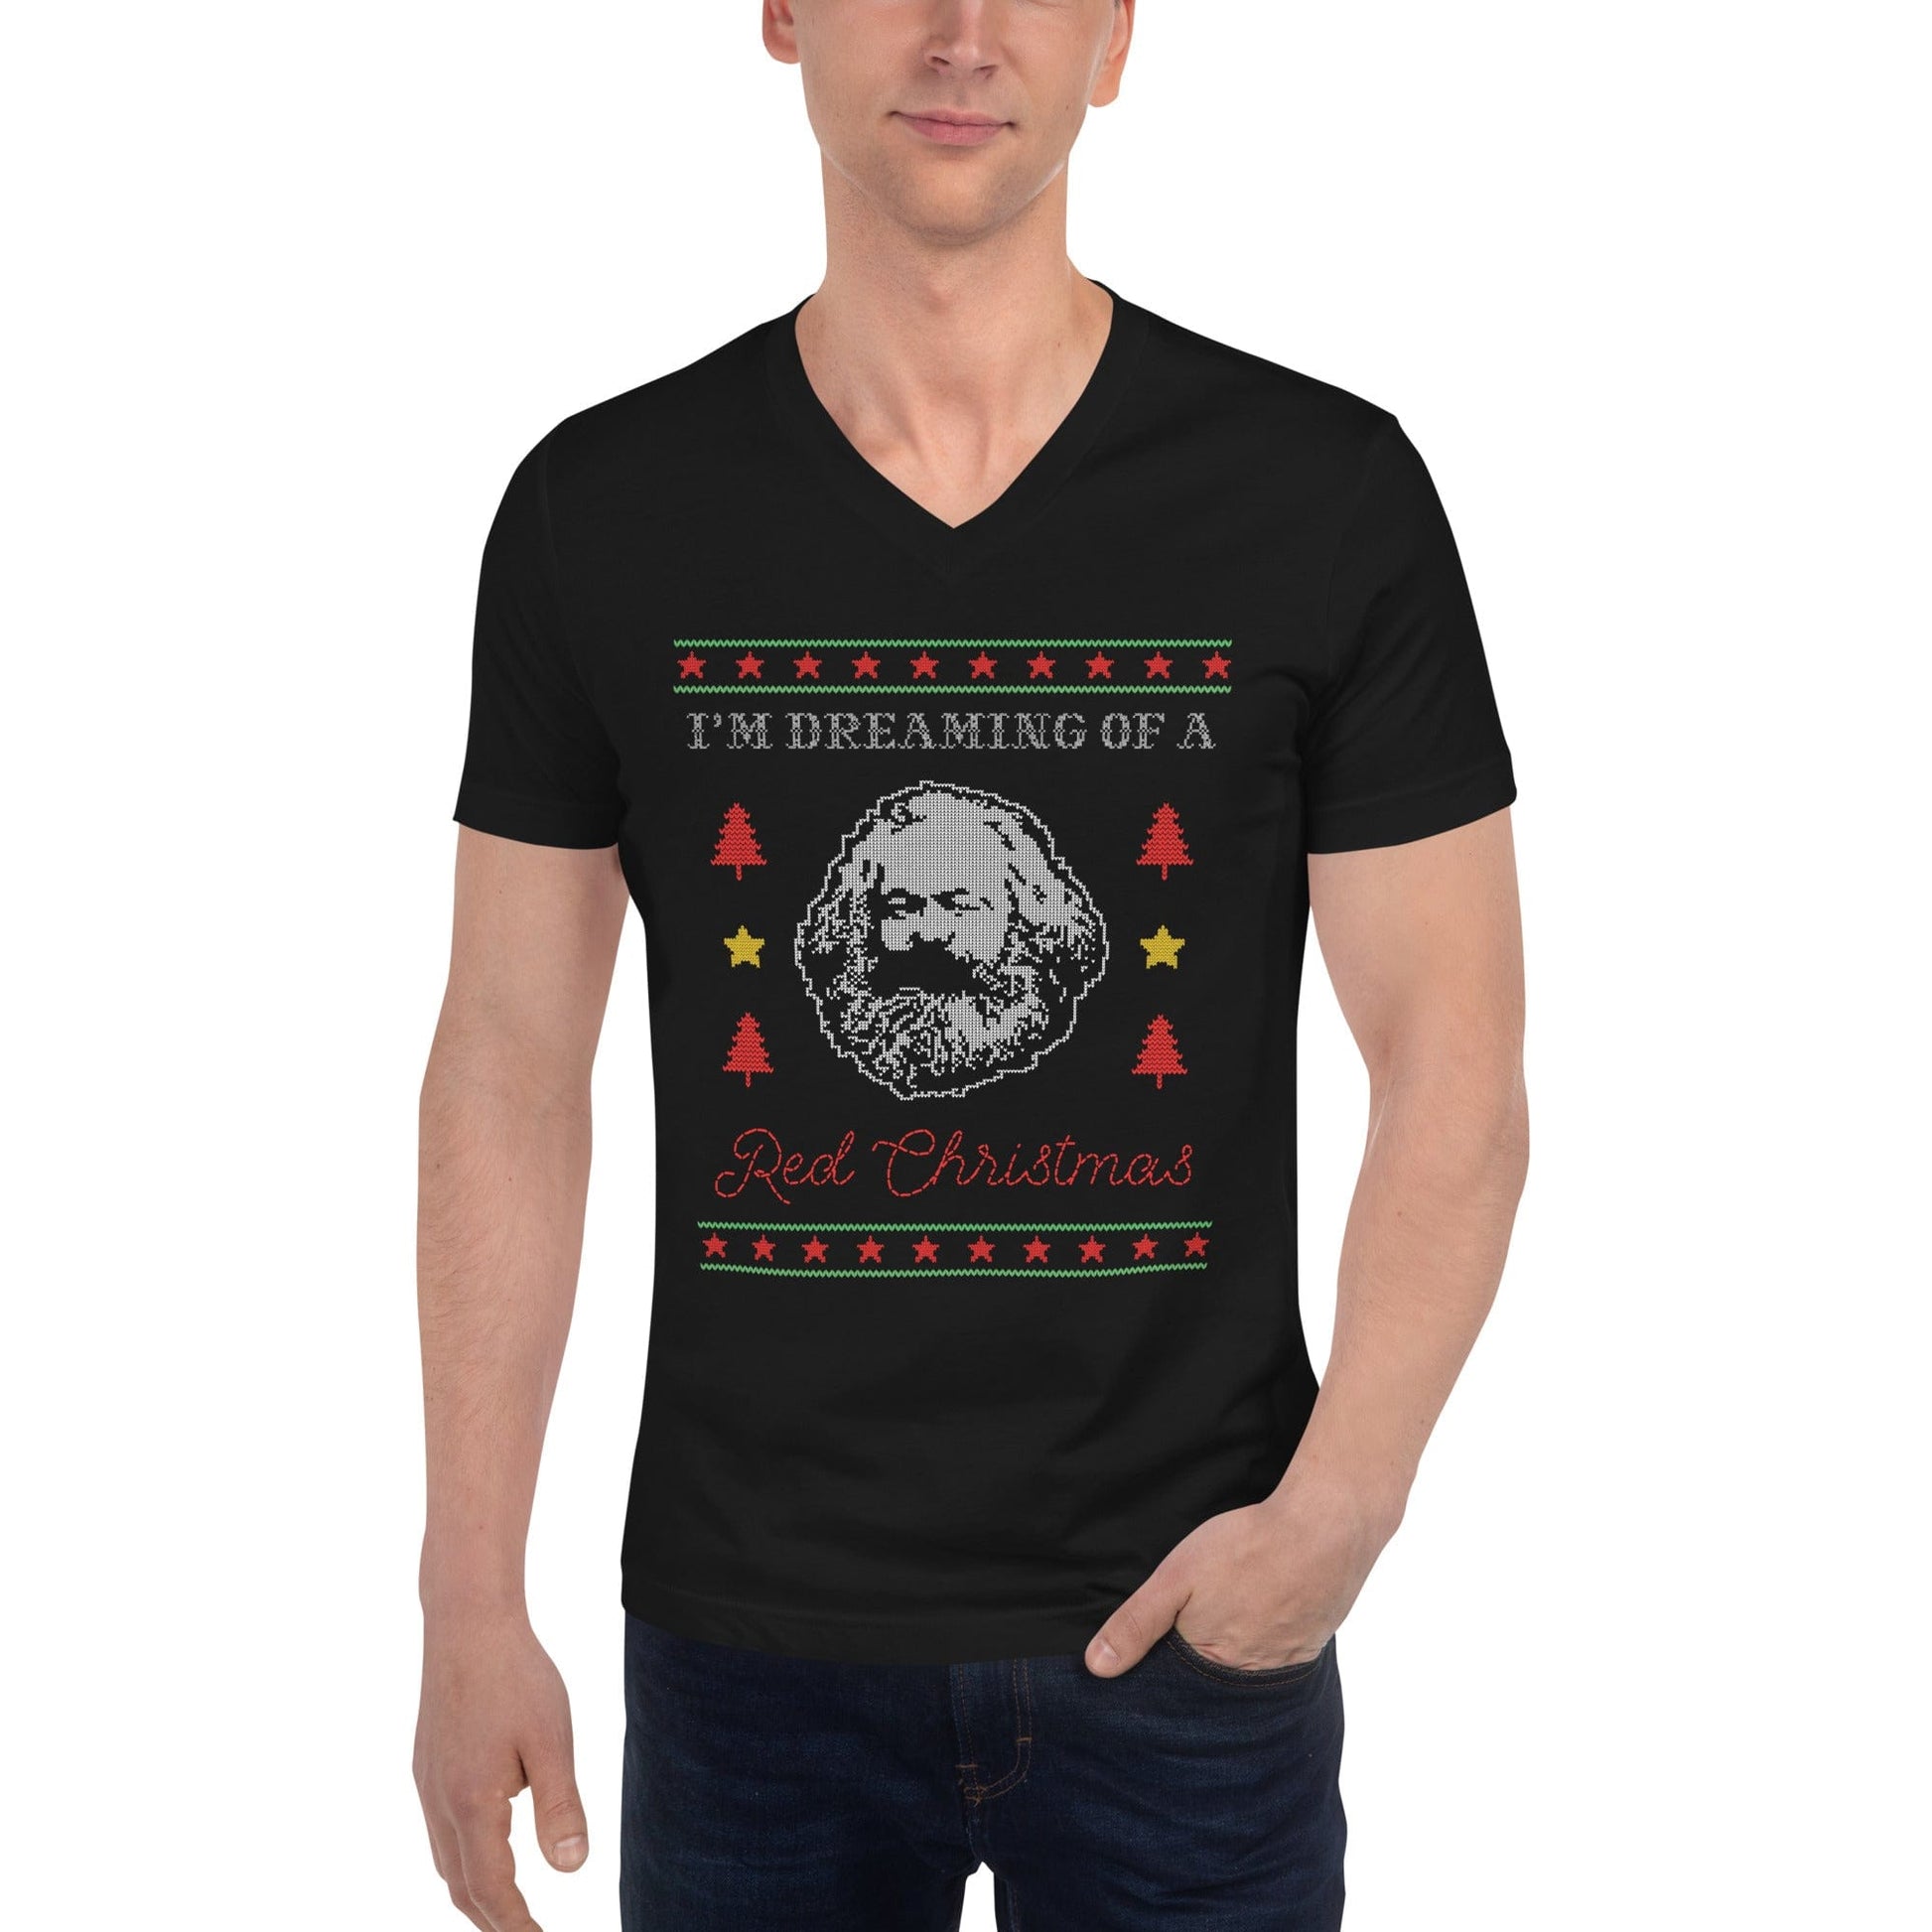 Marx: I’m dreaming of a red Christmas - Unisex V-Neck T-Shirt